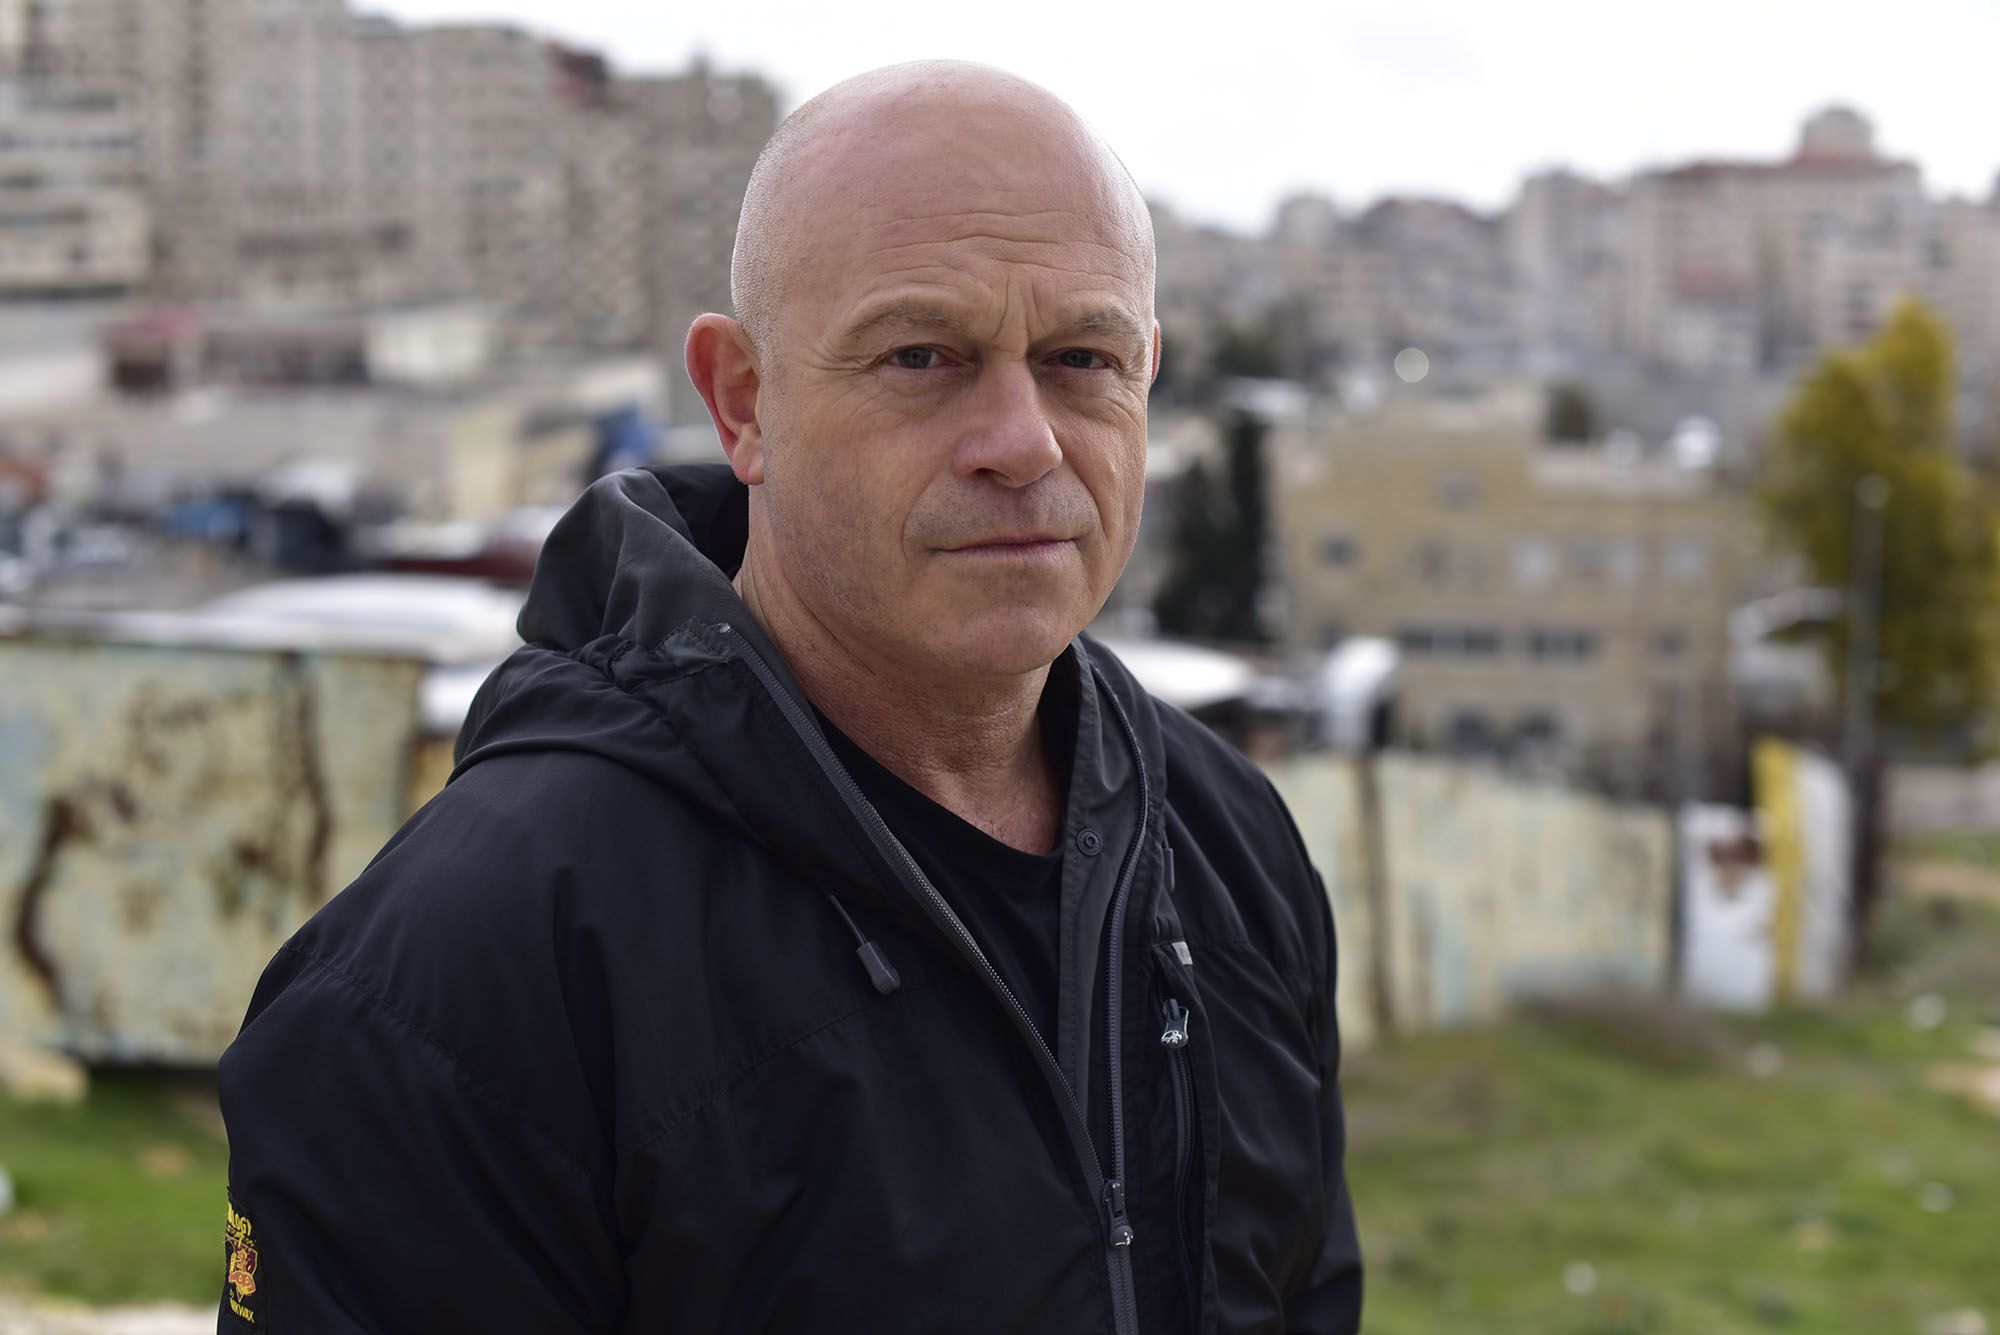 Ross Kemp: Extreme World Season Episodes Streaming Online, 56% OFF